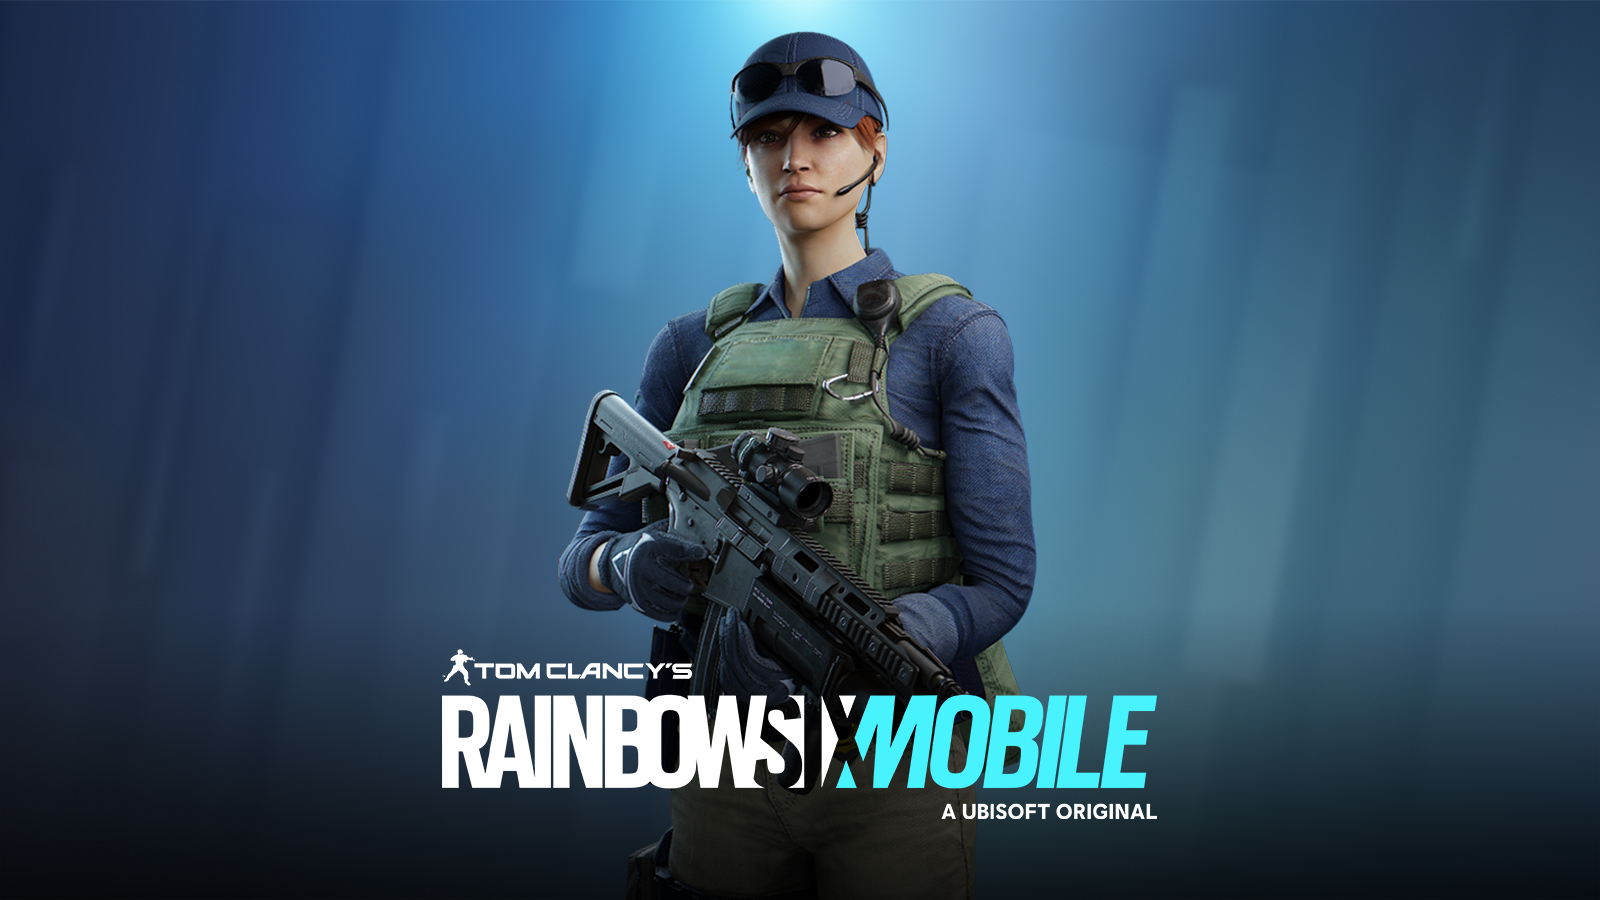 Ubisoft announces Rainbow Six Mobile for both Android and iOS mobile gamers